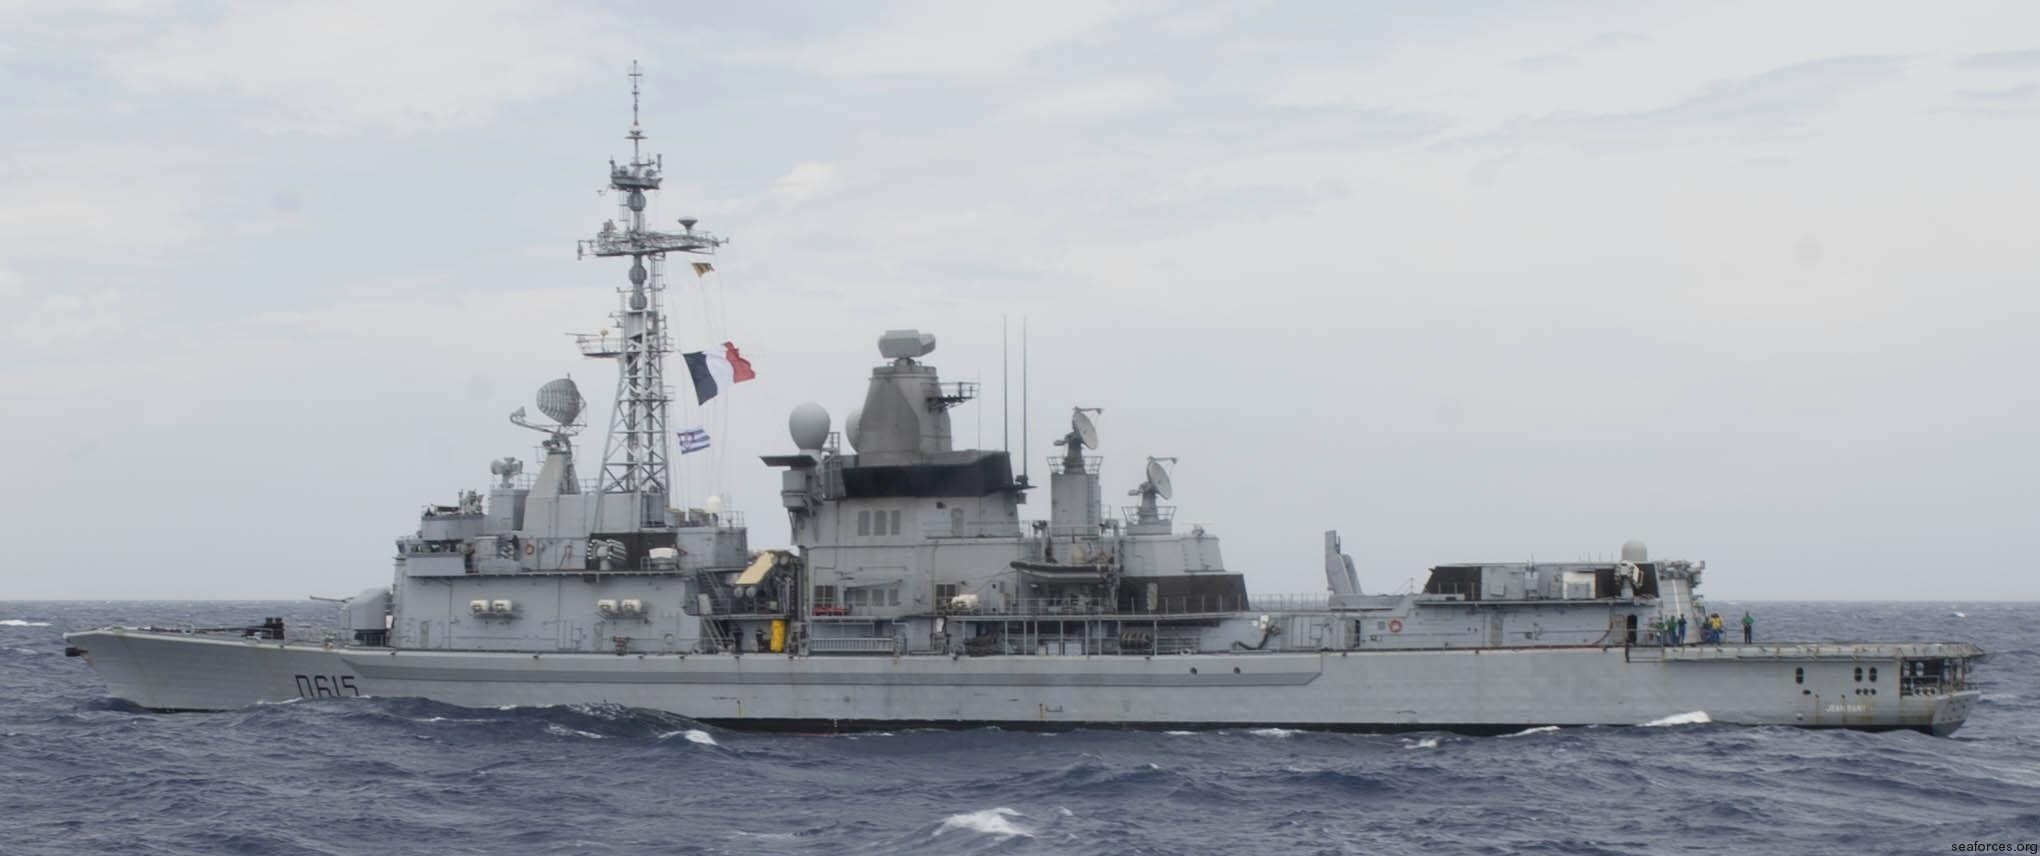 d-615 fs jean bart cassard f70aa class guided missile frigate ffgh ddg french navy marine nationale 27